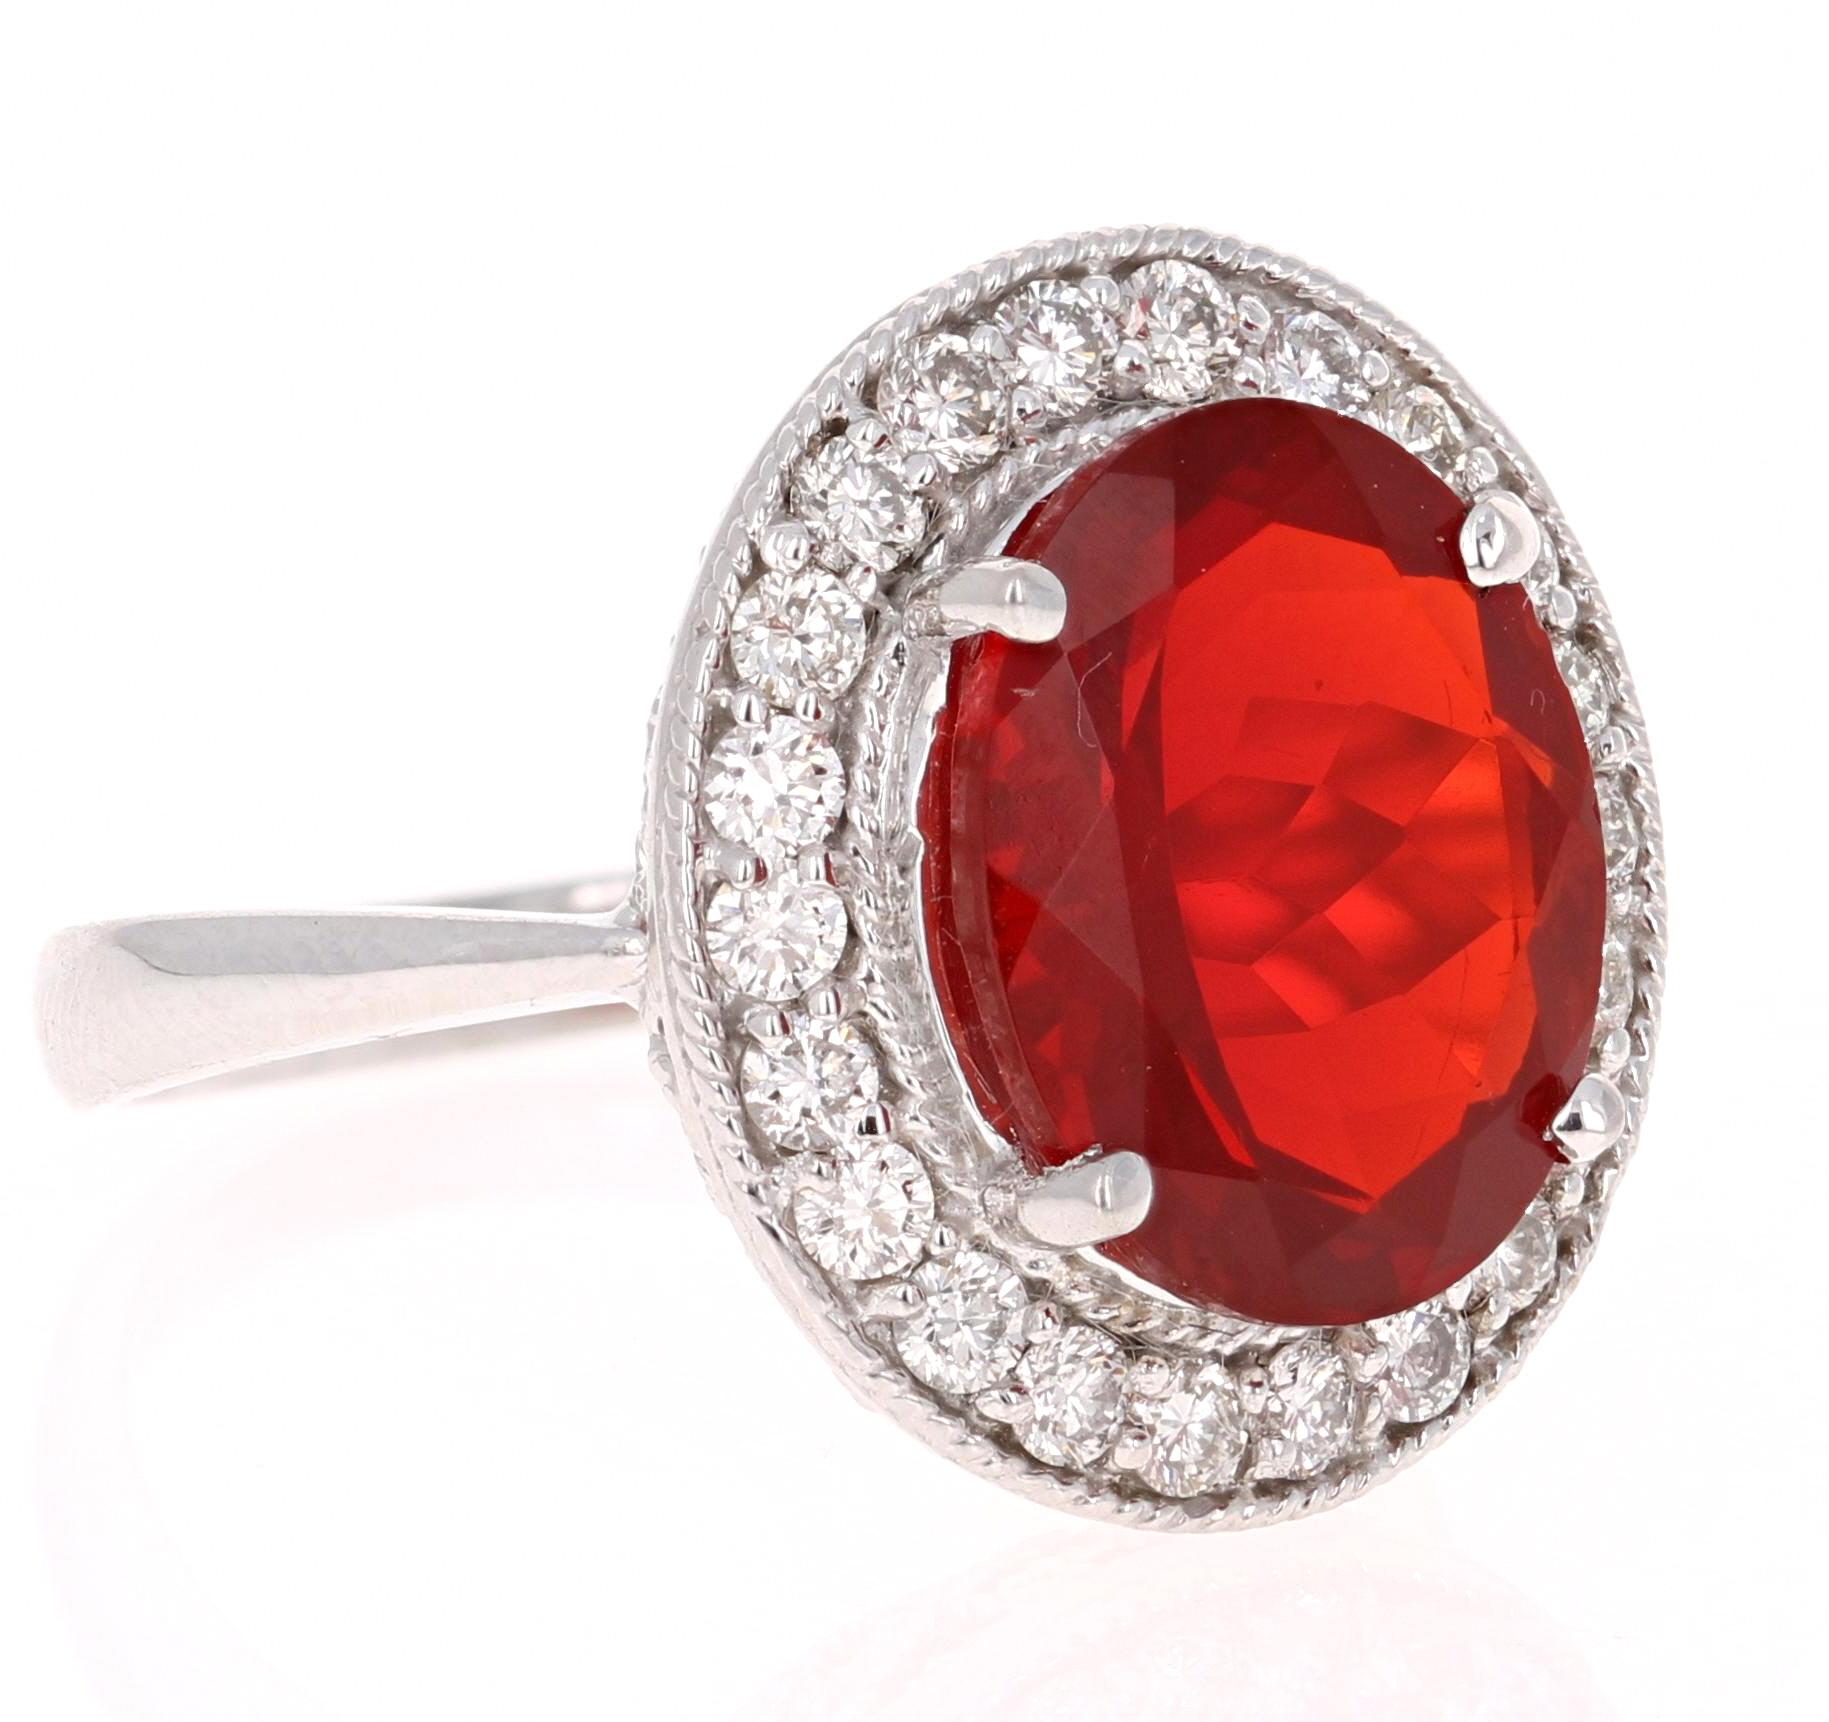 The Fire Opal is 3.99 Carats and is surrounded by 22 Round Cut Diamonds that weigh 0.70 Carats. 

It is set in 14K White Gold and is approximately 5.4 grams. 

The ring size is 7 and can be re-sized at no additional charge. 